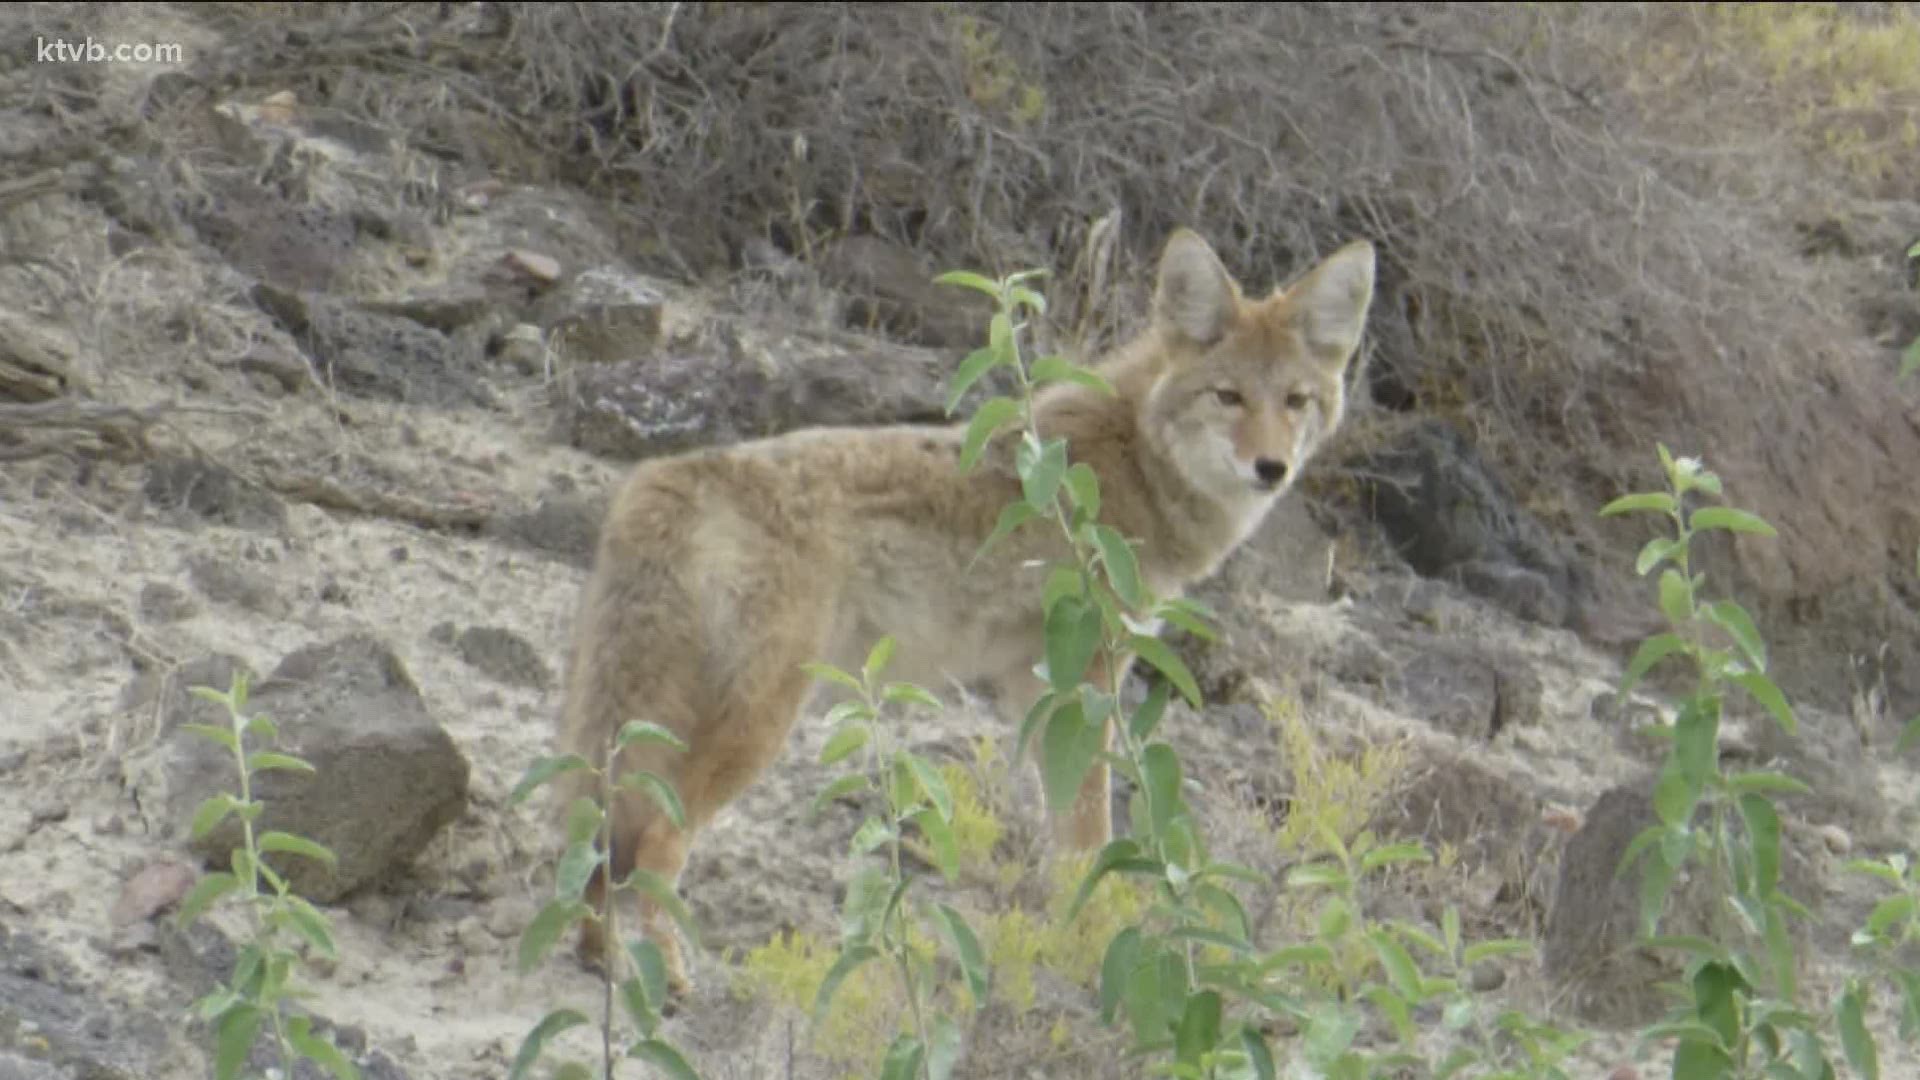 Idaho Fish and Game have received reports of coyote encounters in the past few weeks and say they're showing more aggression towards dogs.